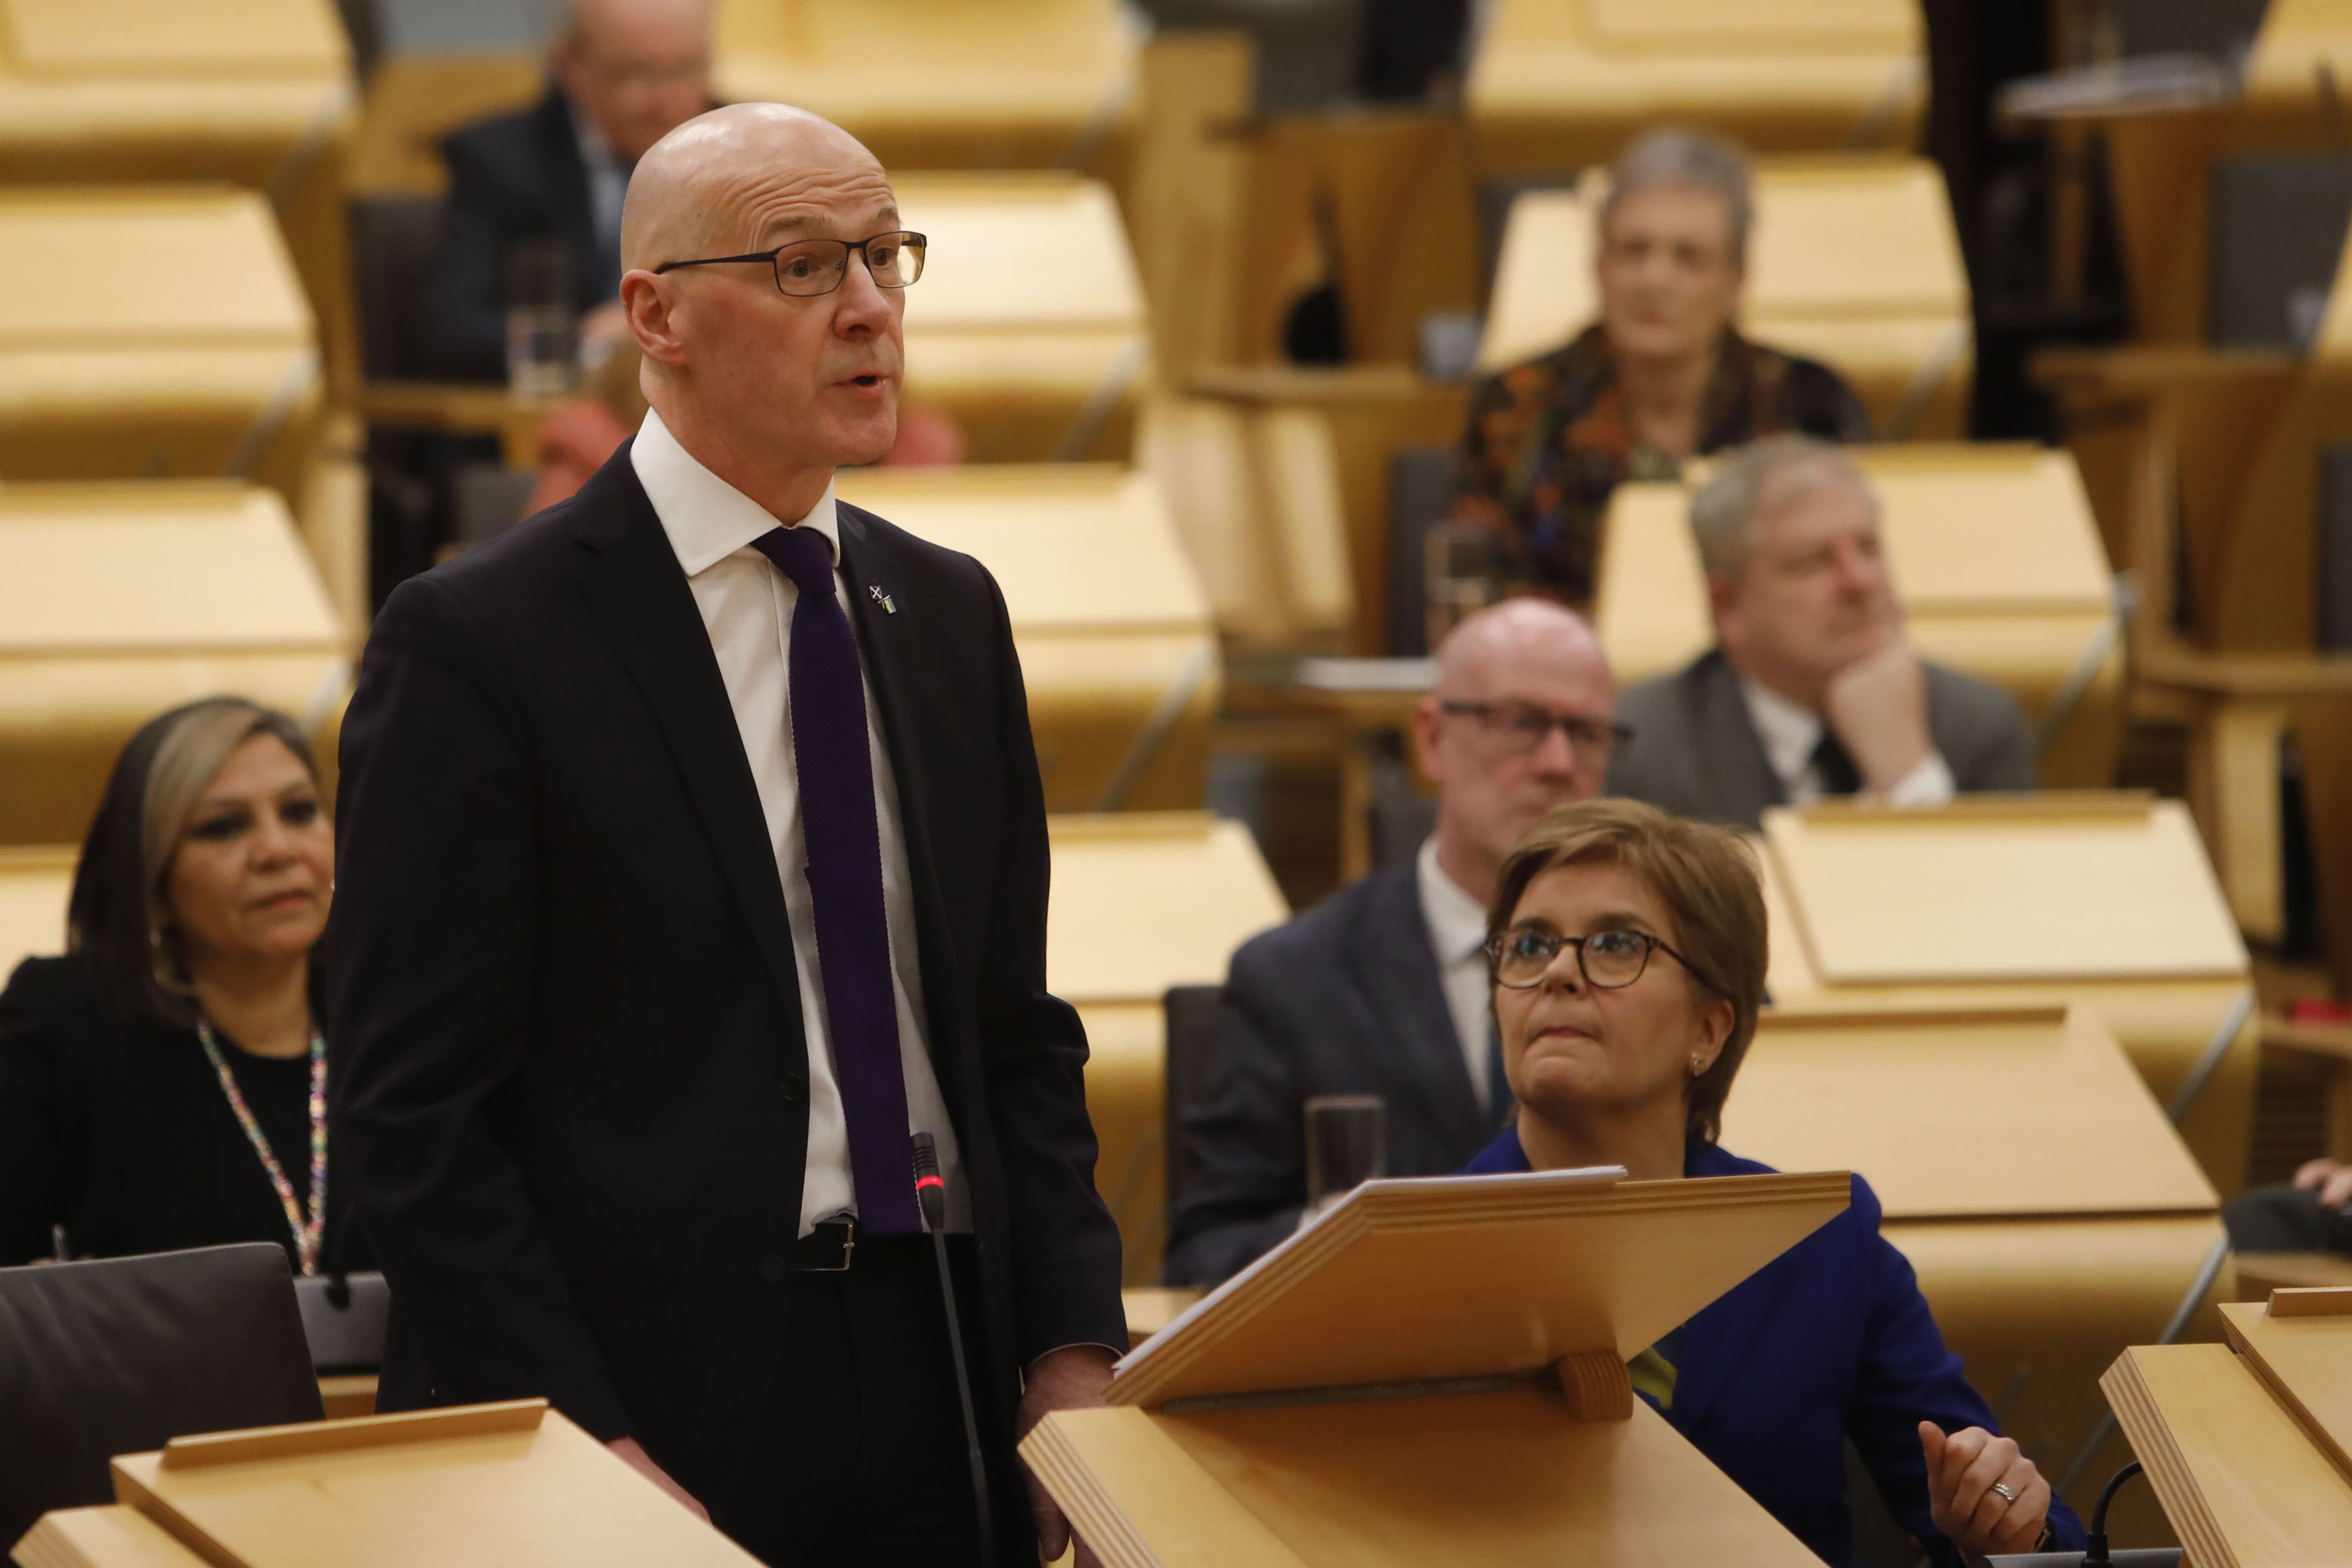 The Deputy First Minister laid out the budget on Thursday (Andrew Cowan/Scottish Parliament/PA)